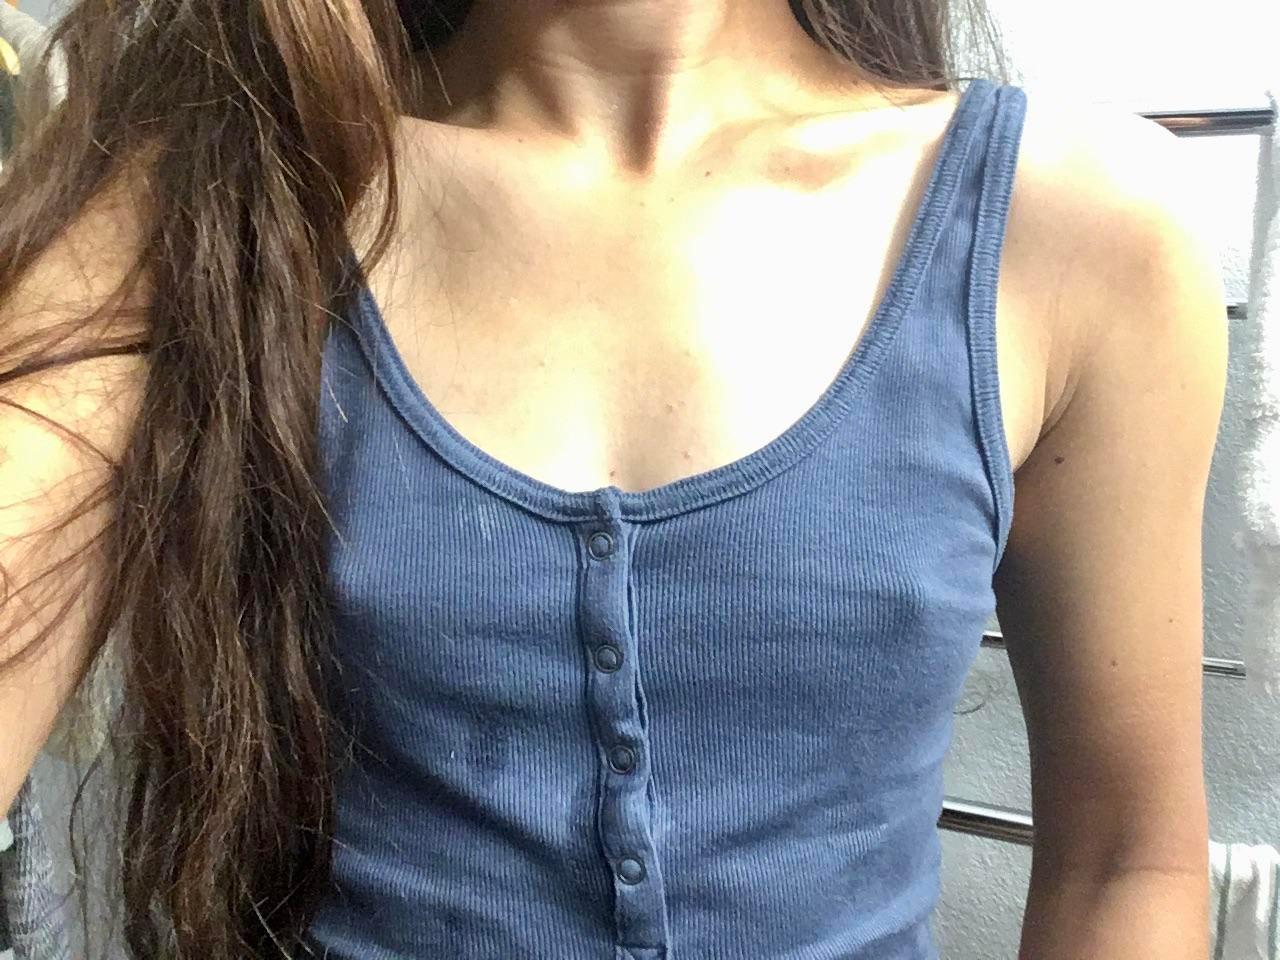 My Tiny Pokies Dont Mind The Spilled Cum On My Shirt ☺️ Scrolller 